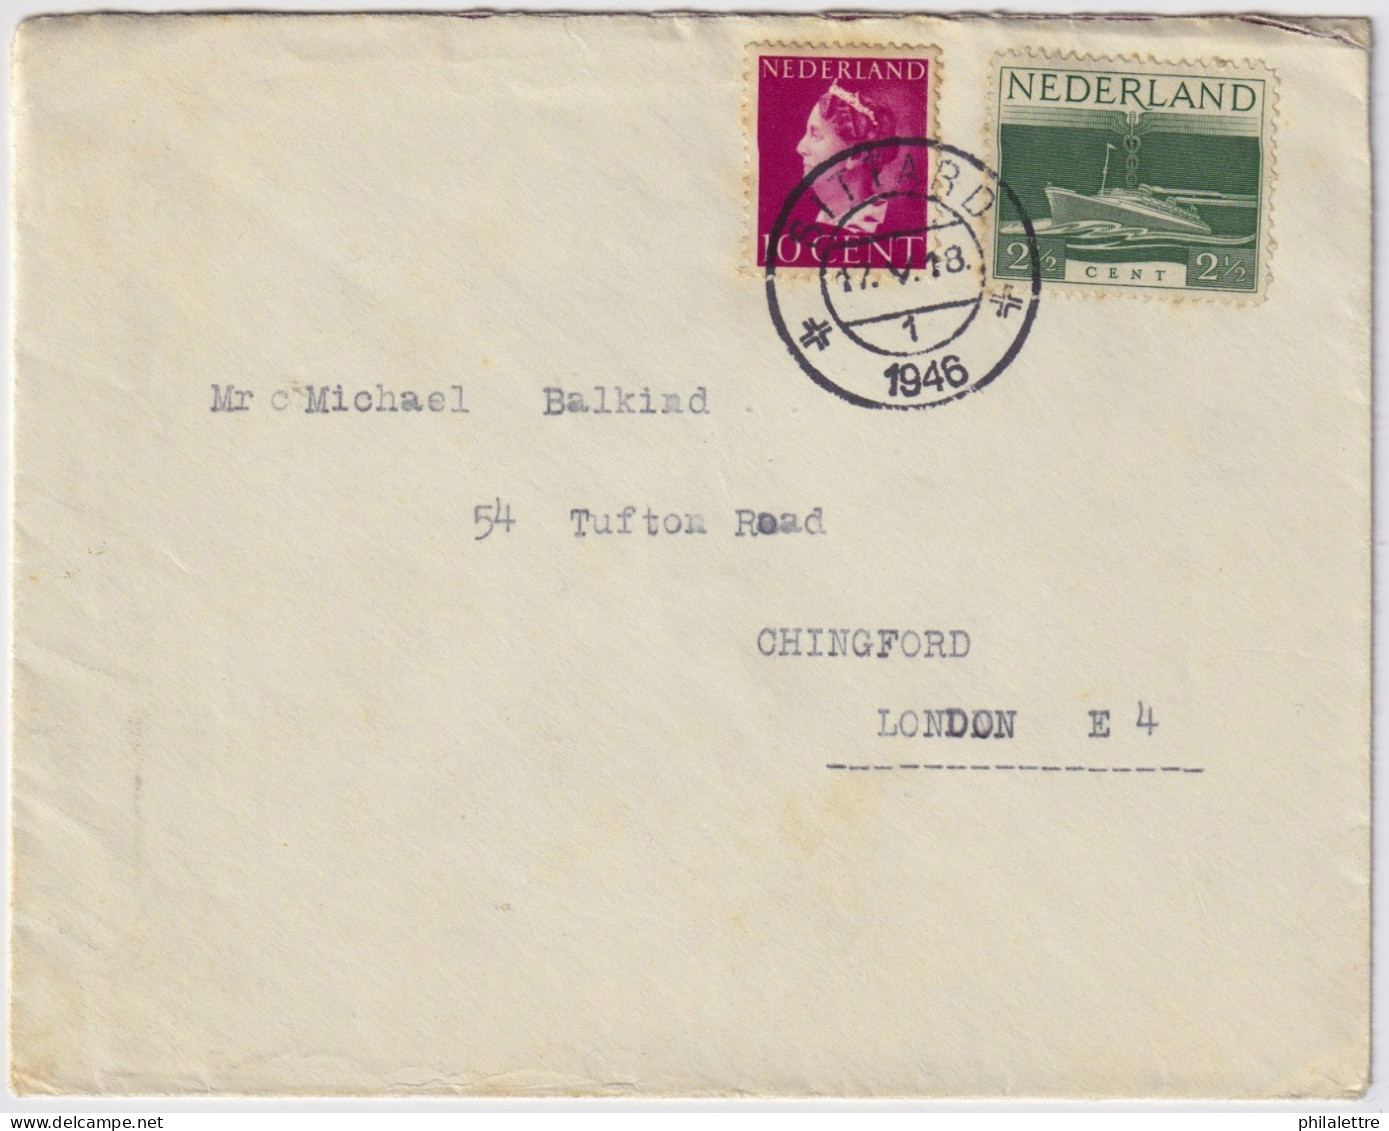 PAYS-BAS / THE NETHERLANDS - 1946 Mi.343 & Mi.429 On Cover From SITTARD To LONDON, England - Covers & Documents